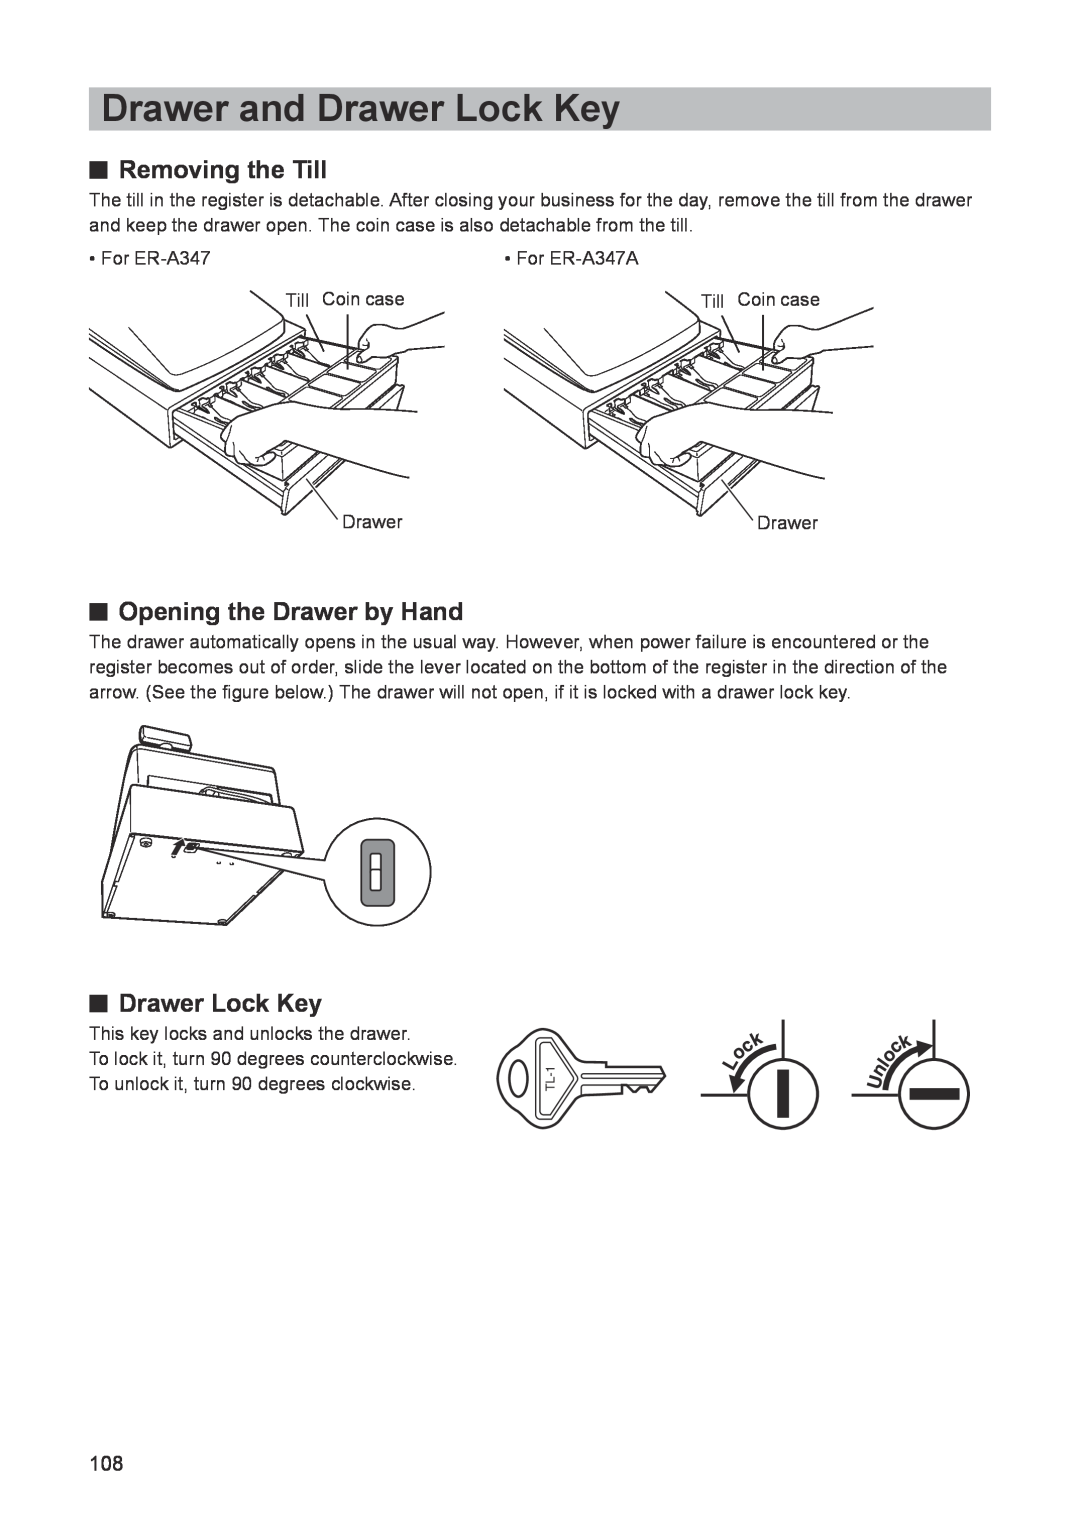 Sharp ER-A347A instruction manual Drawer and Drawer Lock Key, Removing the Till, Opening the Drawer by Hand 